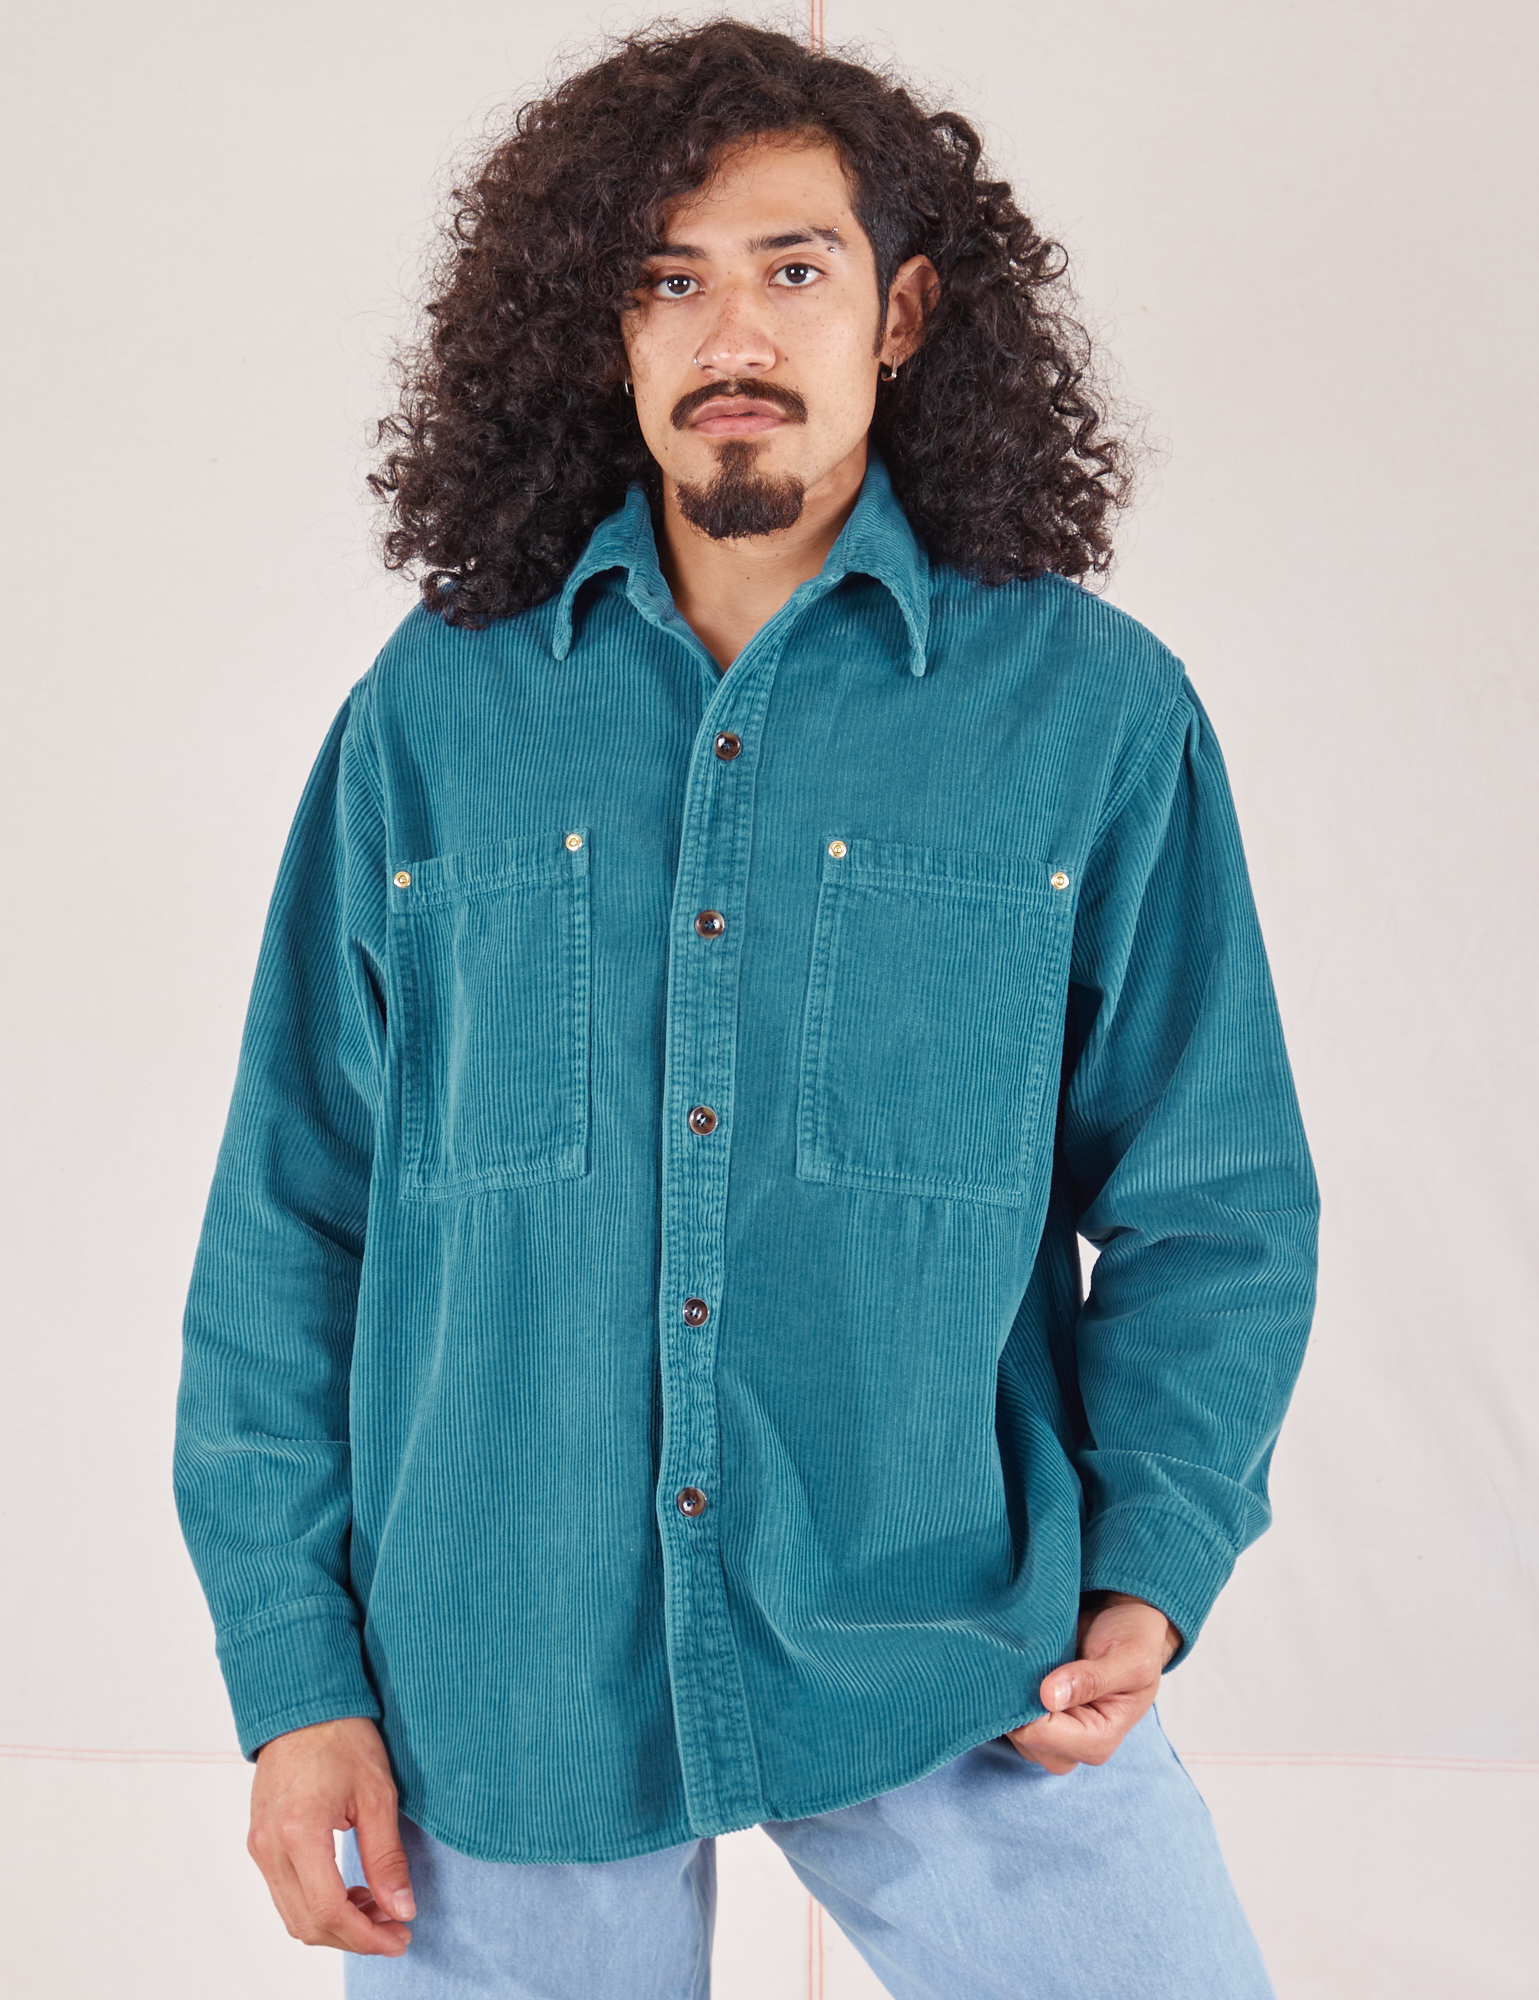 Jesse is 5&#39;8&quot; and wearing XS Corduroy Overshirt in Marine Blue